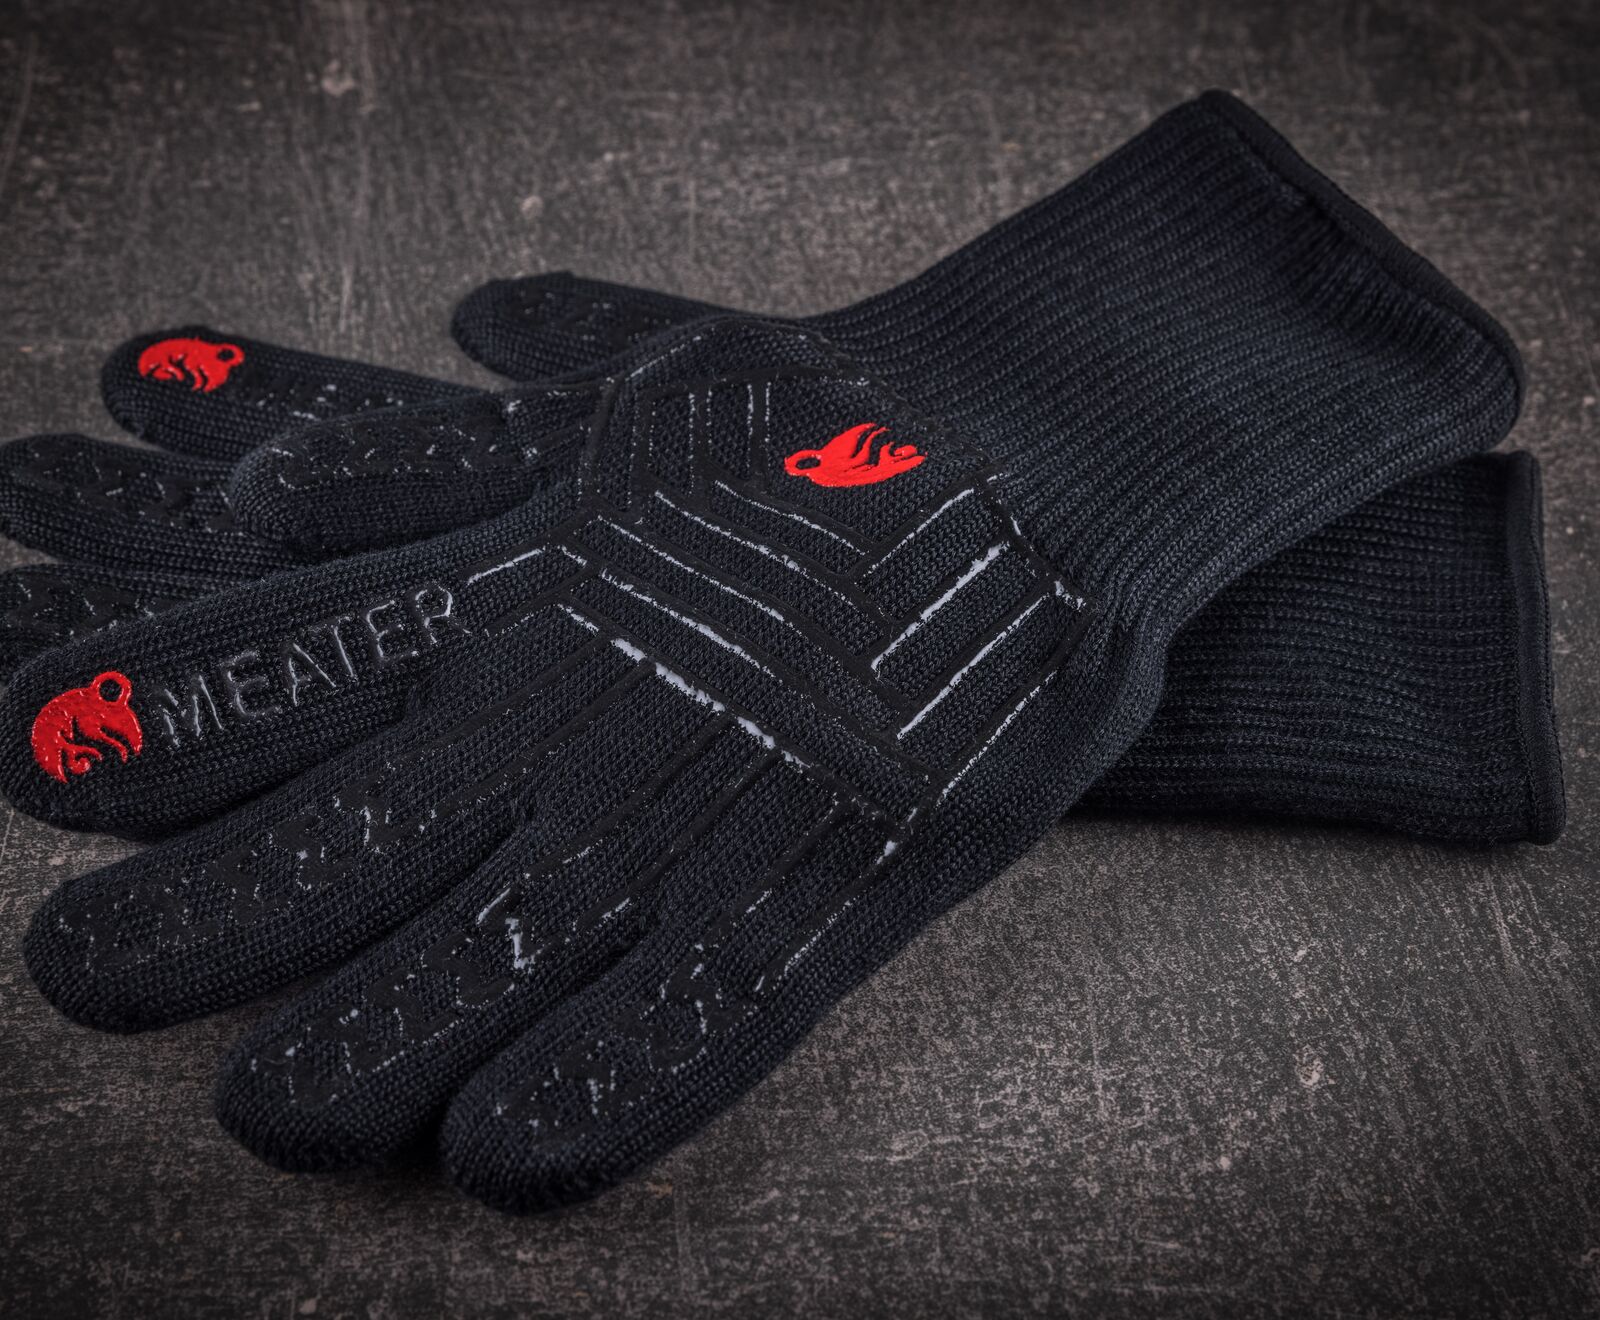 MEATER Grillhandschuhe 